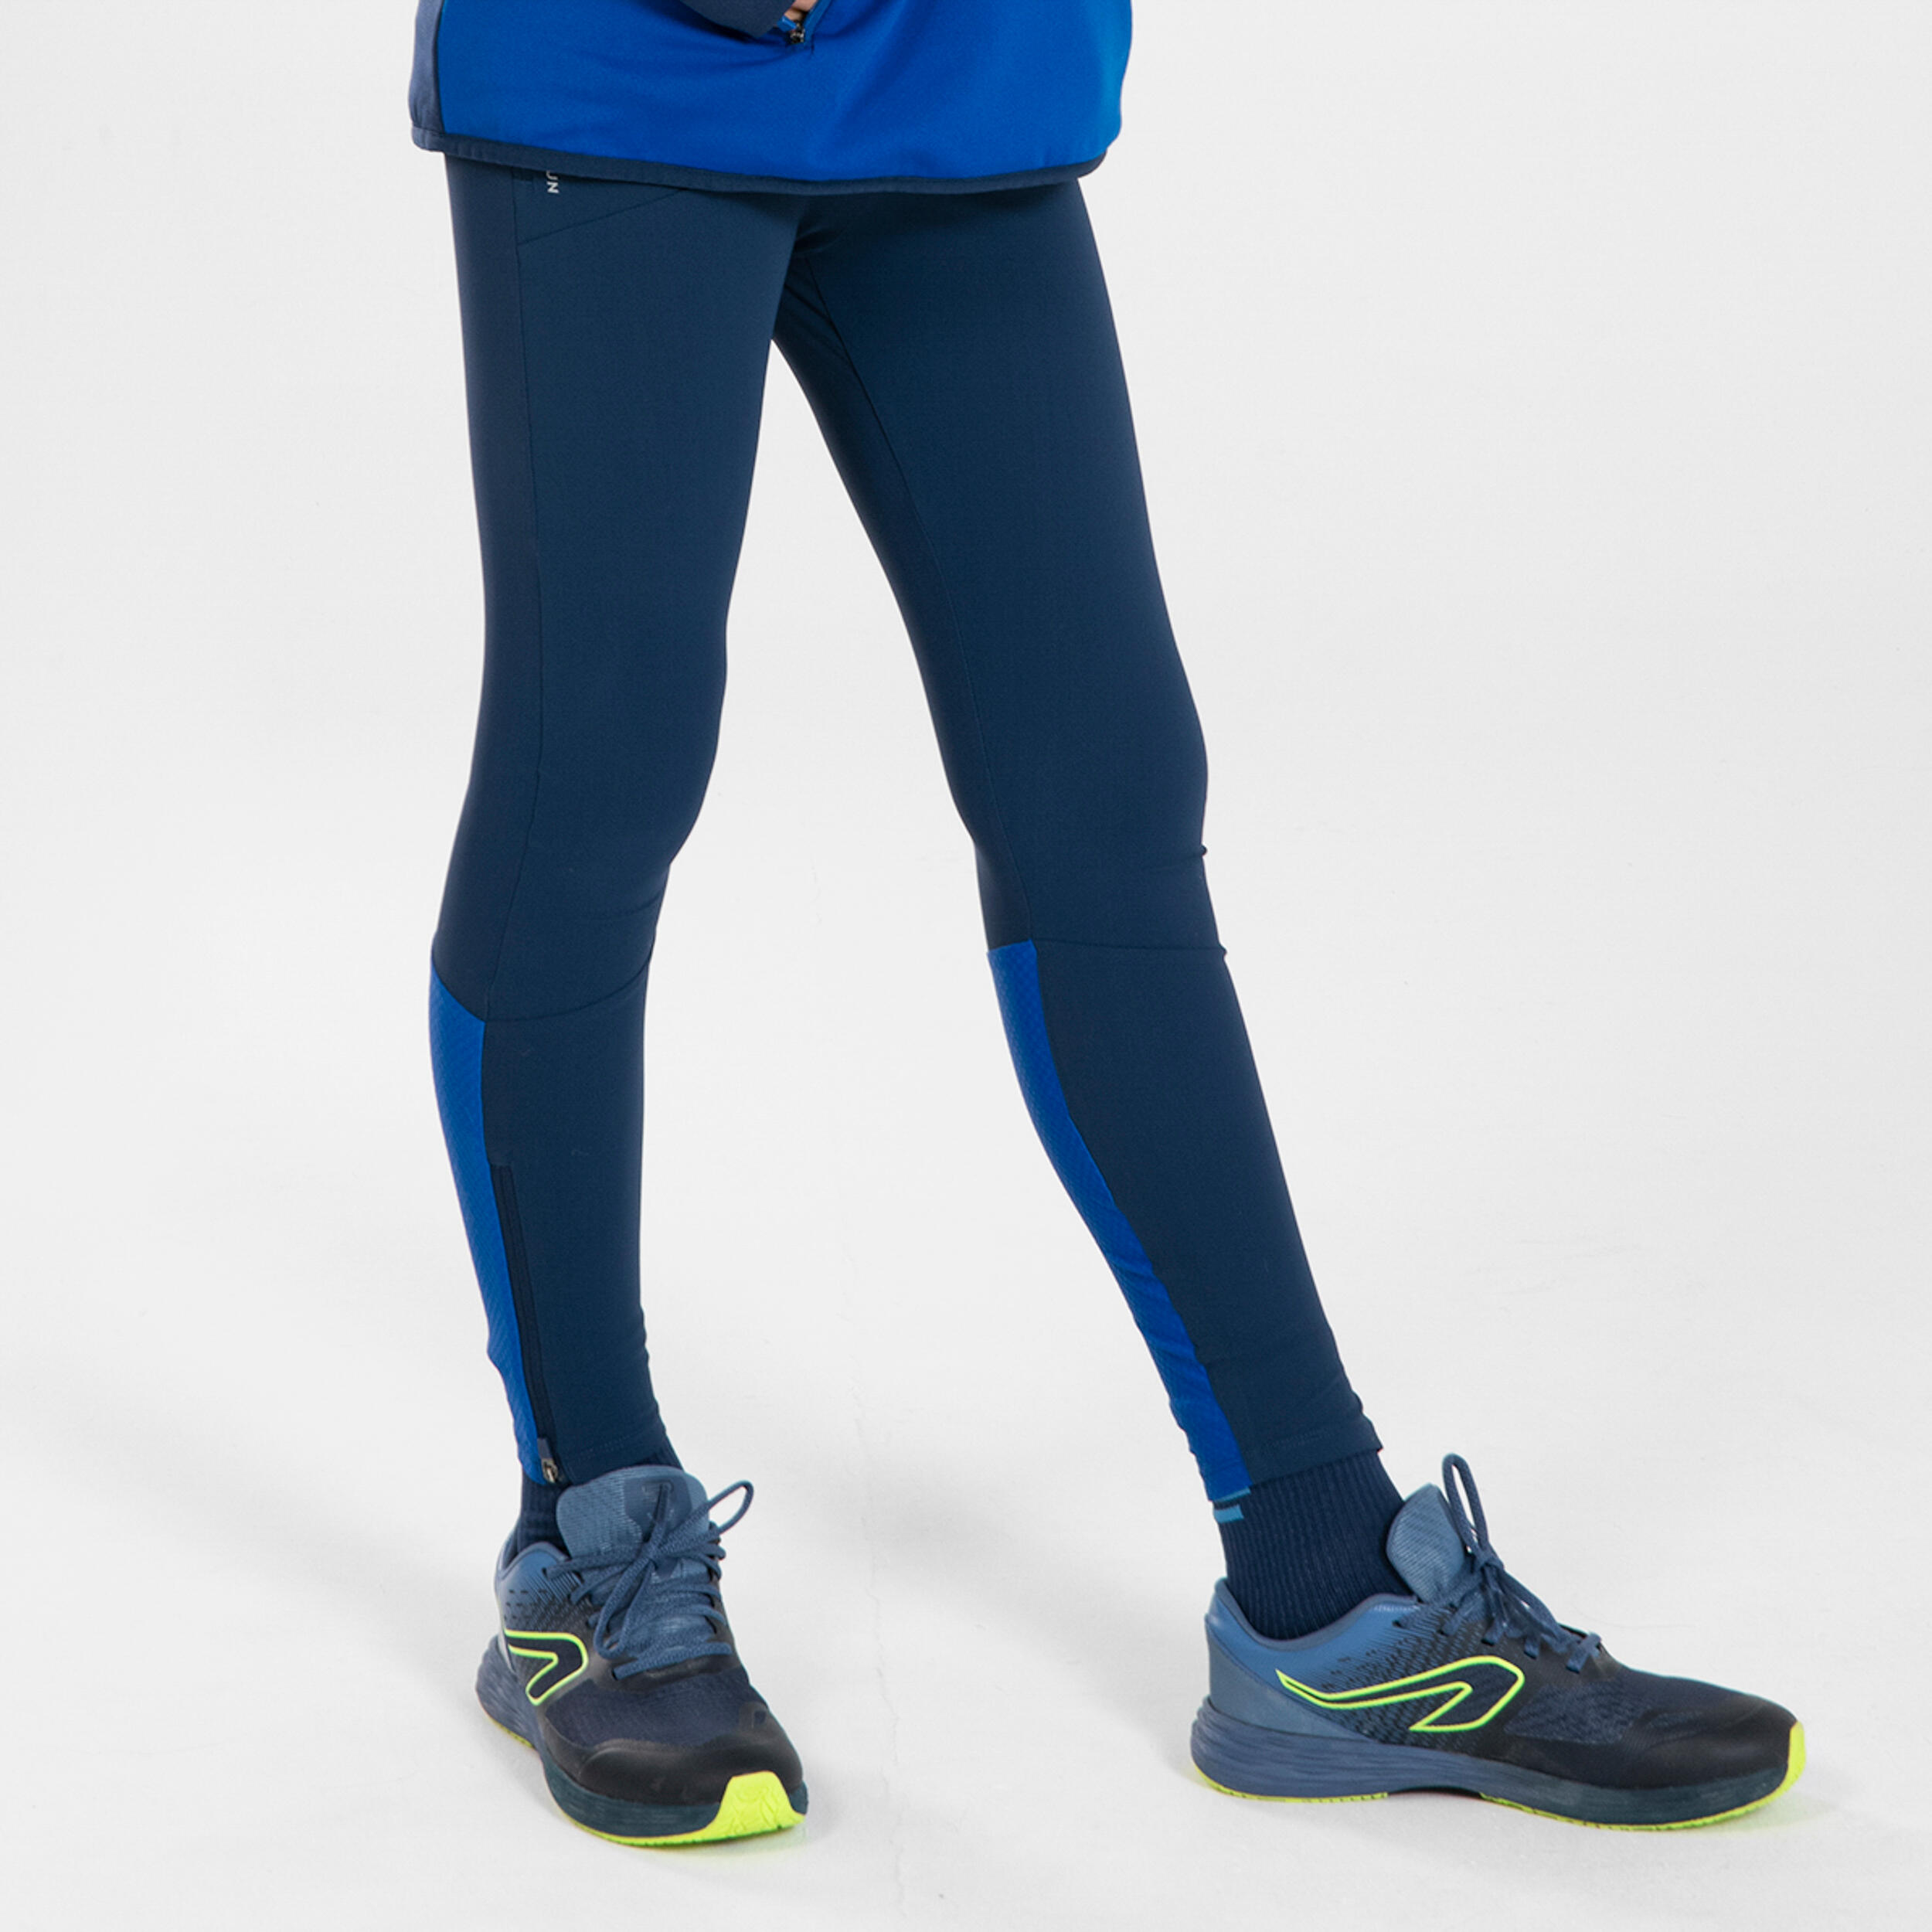 KIDS' RUNNING TIGHTS - KIPRUN DRY+ NAVY BLUE AND ELECTRIC BLUE 10/12